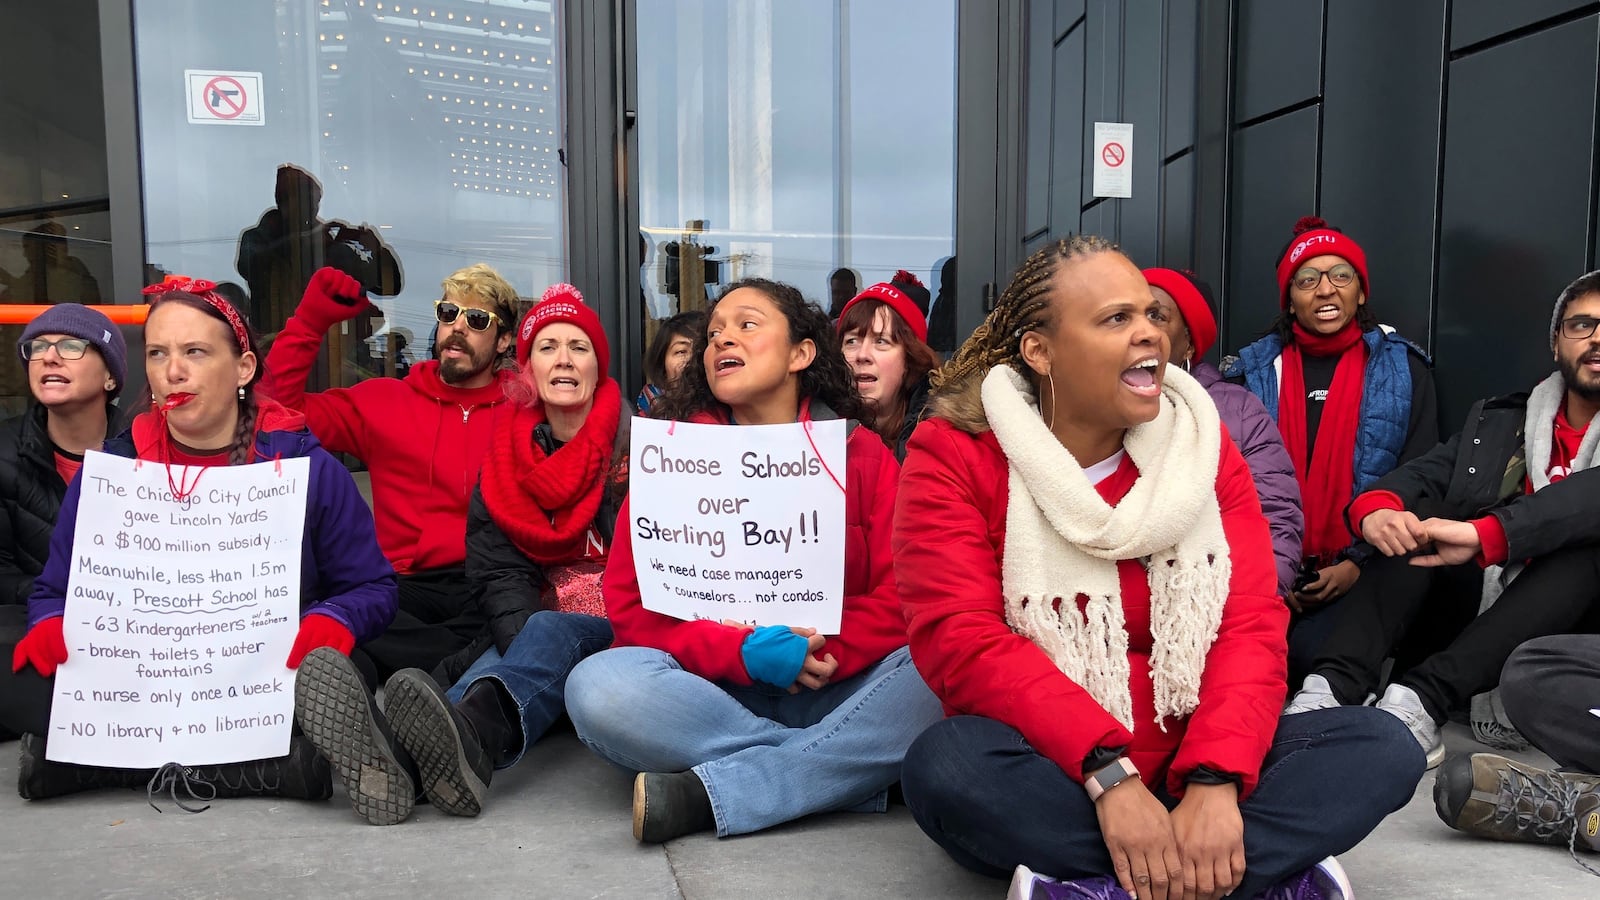 About 40 CTU members protested outside the West Loop headquarters of Lincoln Yards developer Sterling Bay on the ninth day of a citywide teacher strike. The teachers sought to deliver a letter highlighting the use of tax incentives for the development.